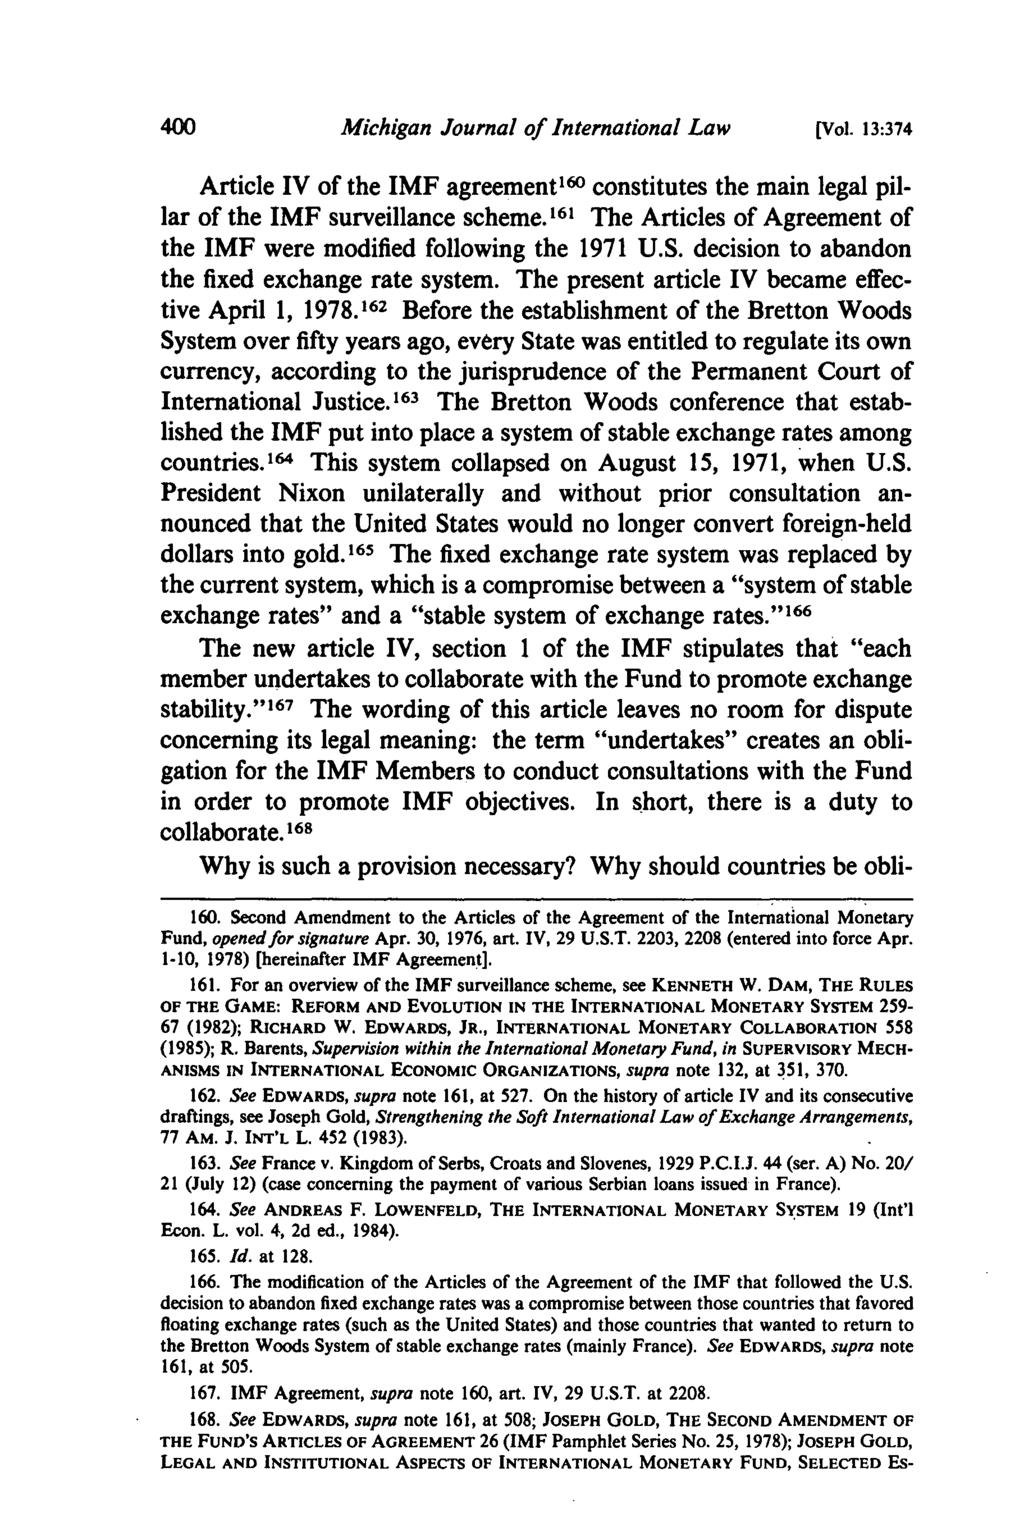 Michigan Journal of International Law [Vol. 13:374 Article IV of the IMF agreement 160 constitutes the main legal pillar of the IMF surveillance scheme.